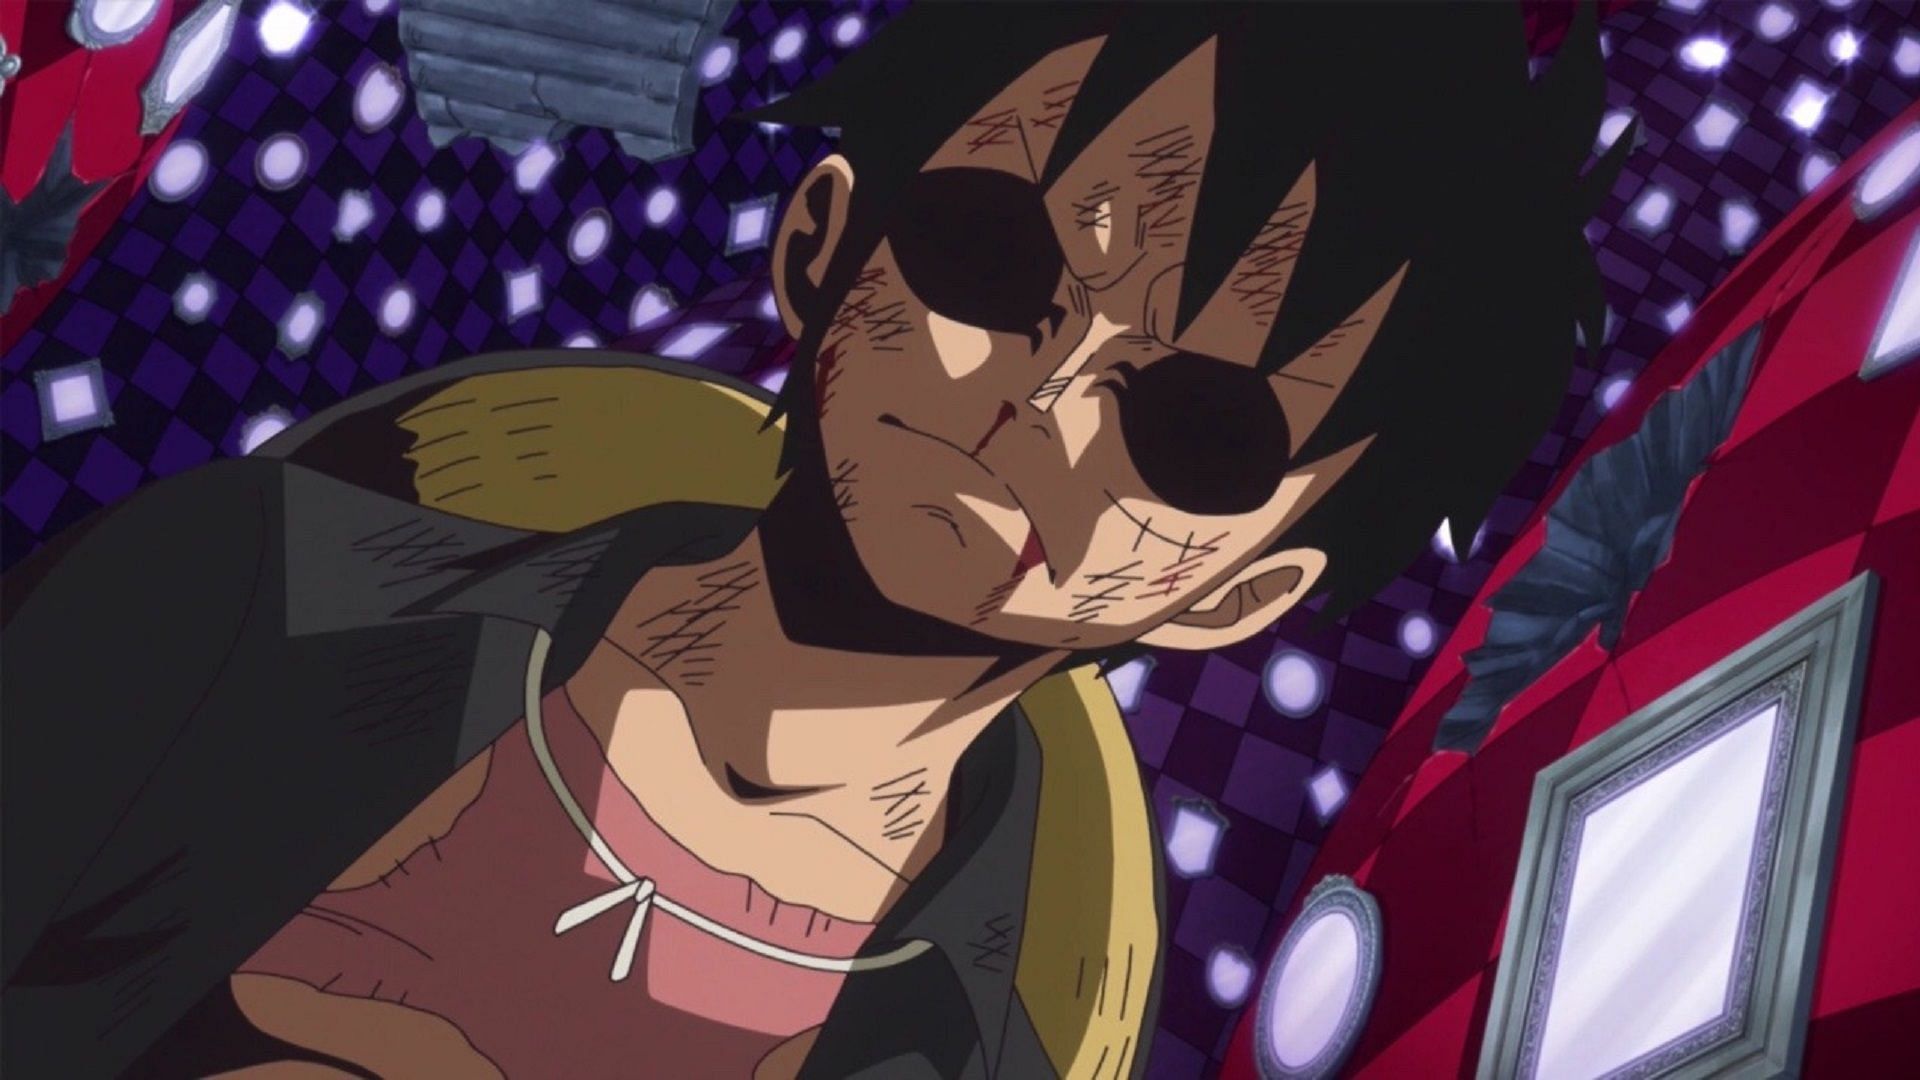 Luffy as seen in One Piece (Image via Toei Animation, One Piece)